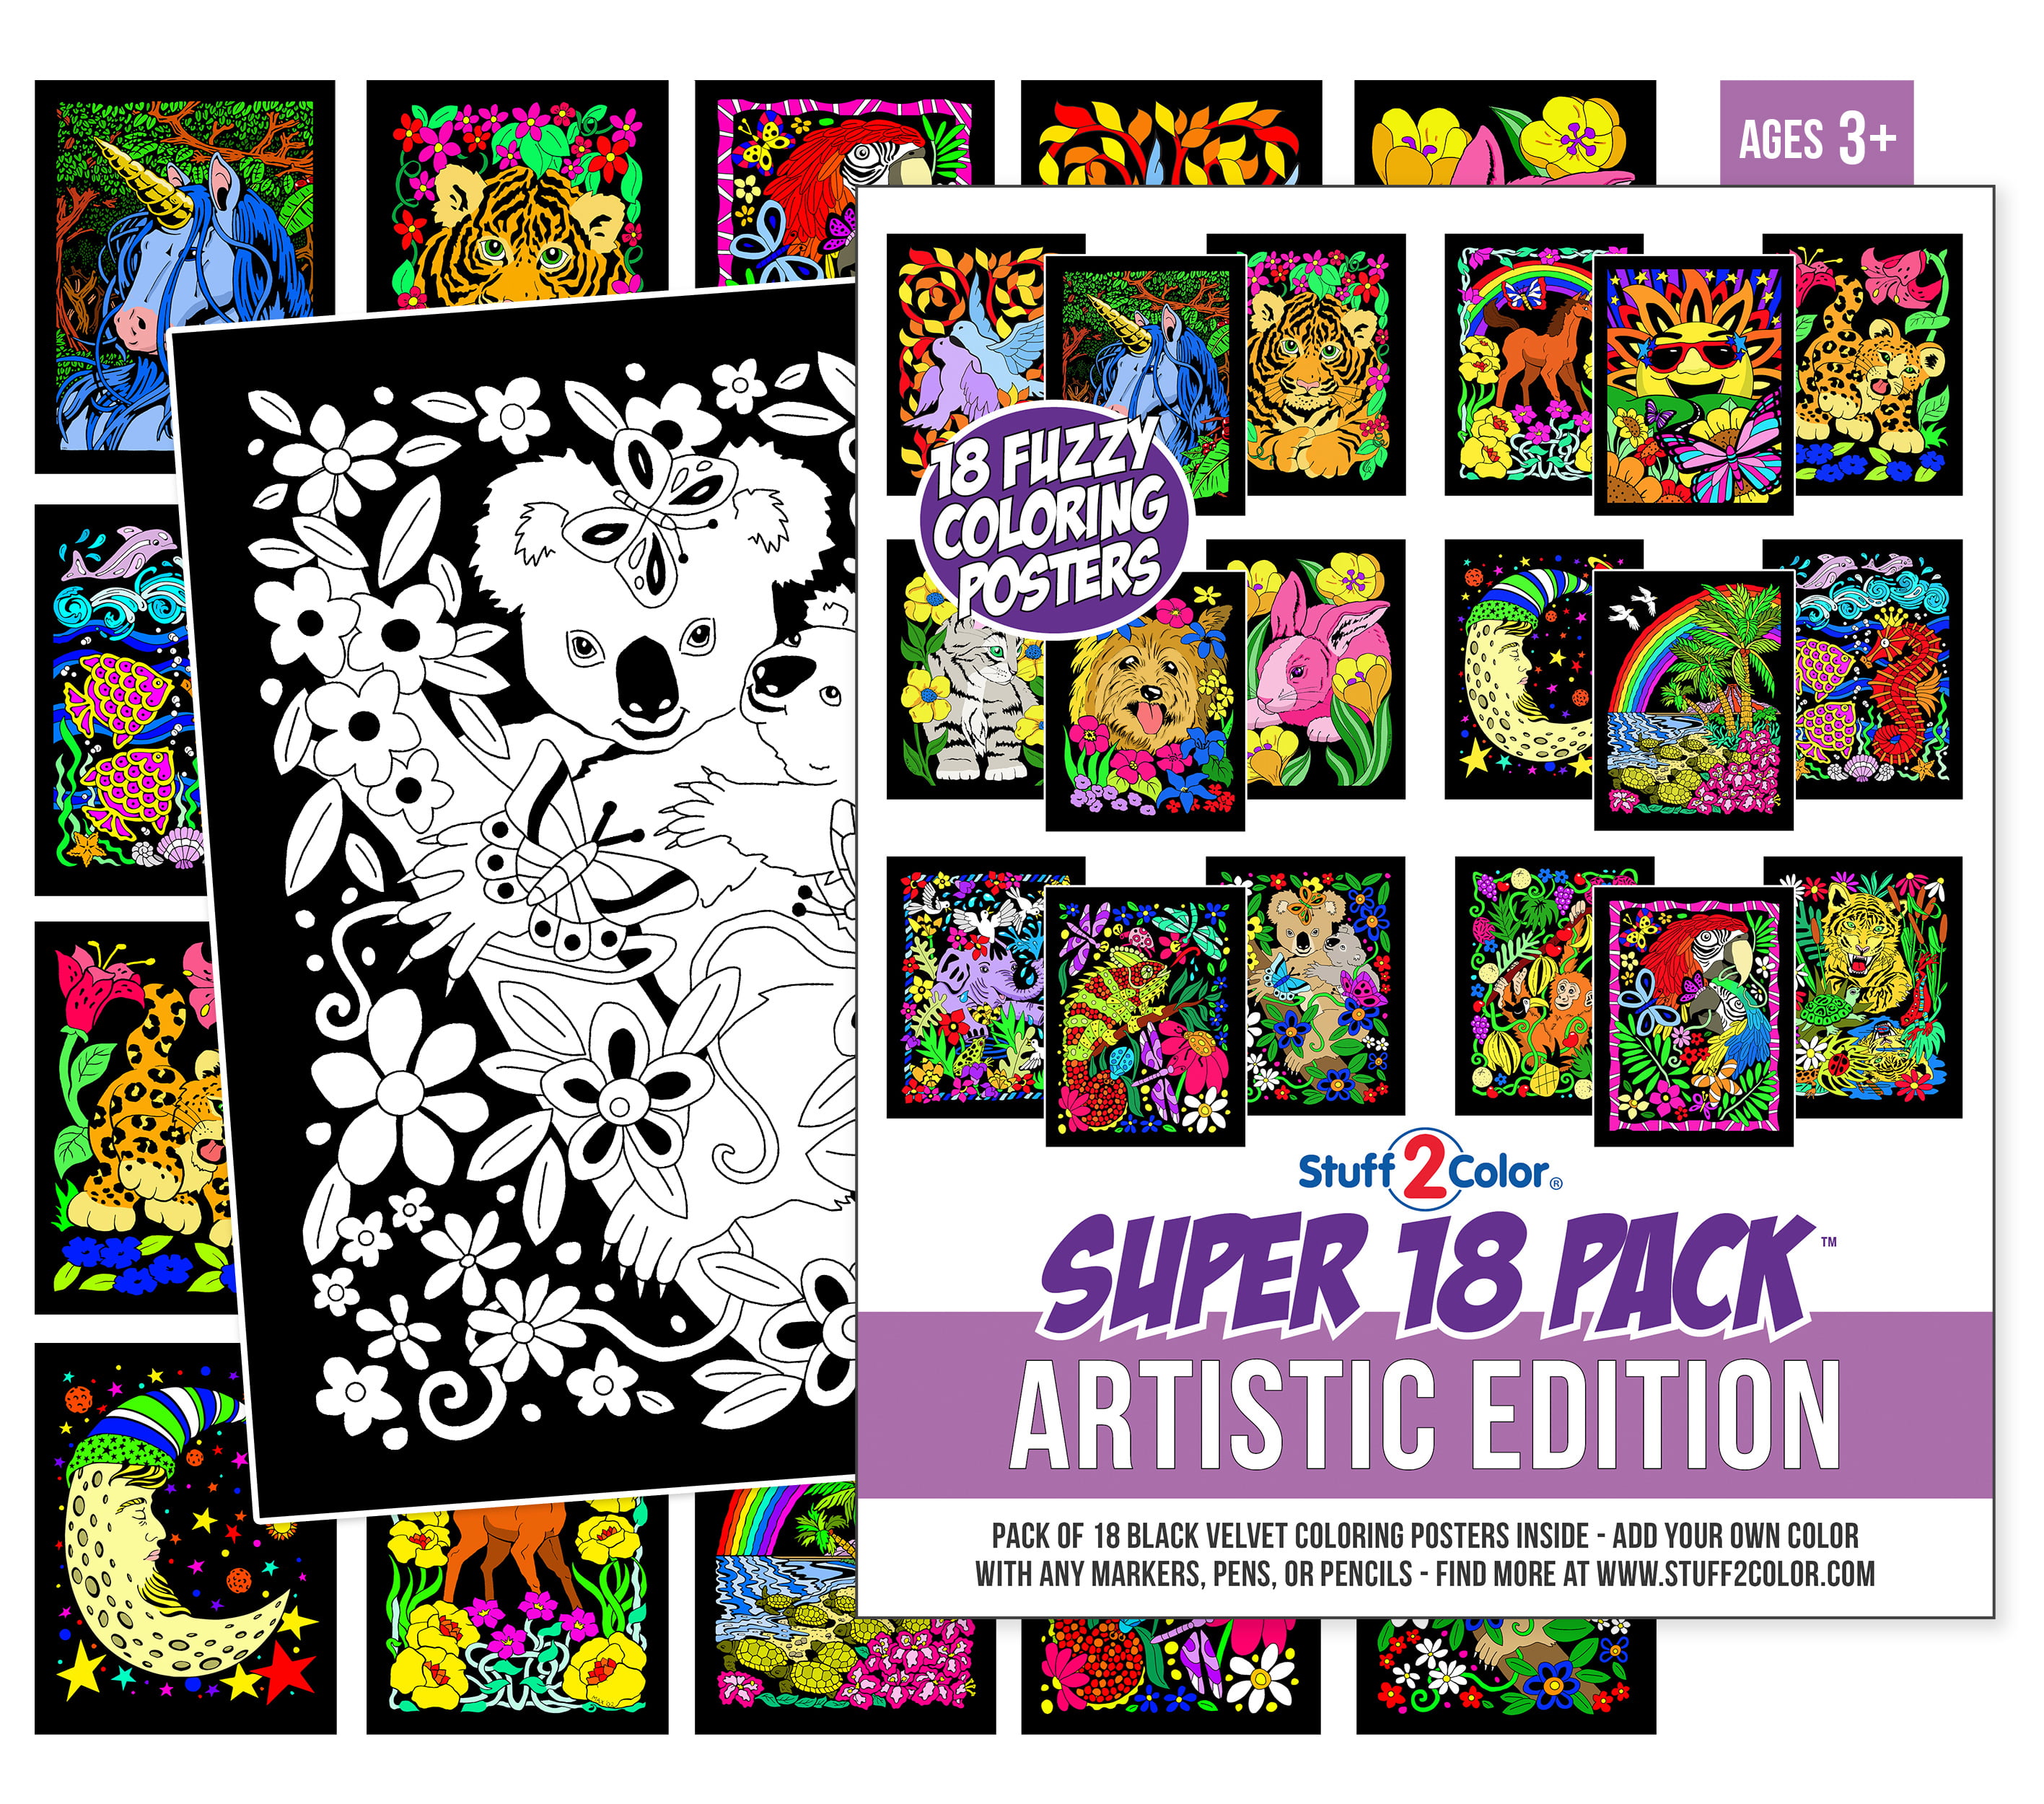 Stuff2Color Super Pack of 18 Fuzzy Velvet Coloring Posters (Animal Smiles)  - Arts & Crafts for Girls and Boys - Great for After School, Travel